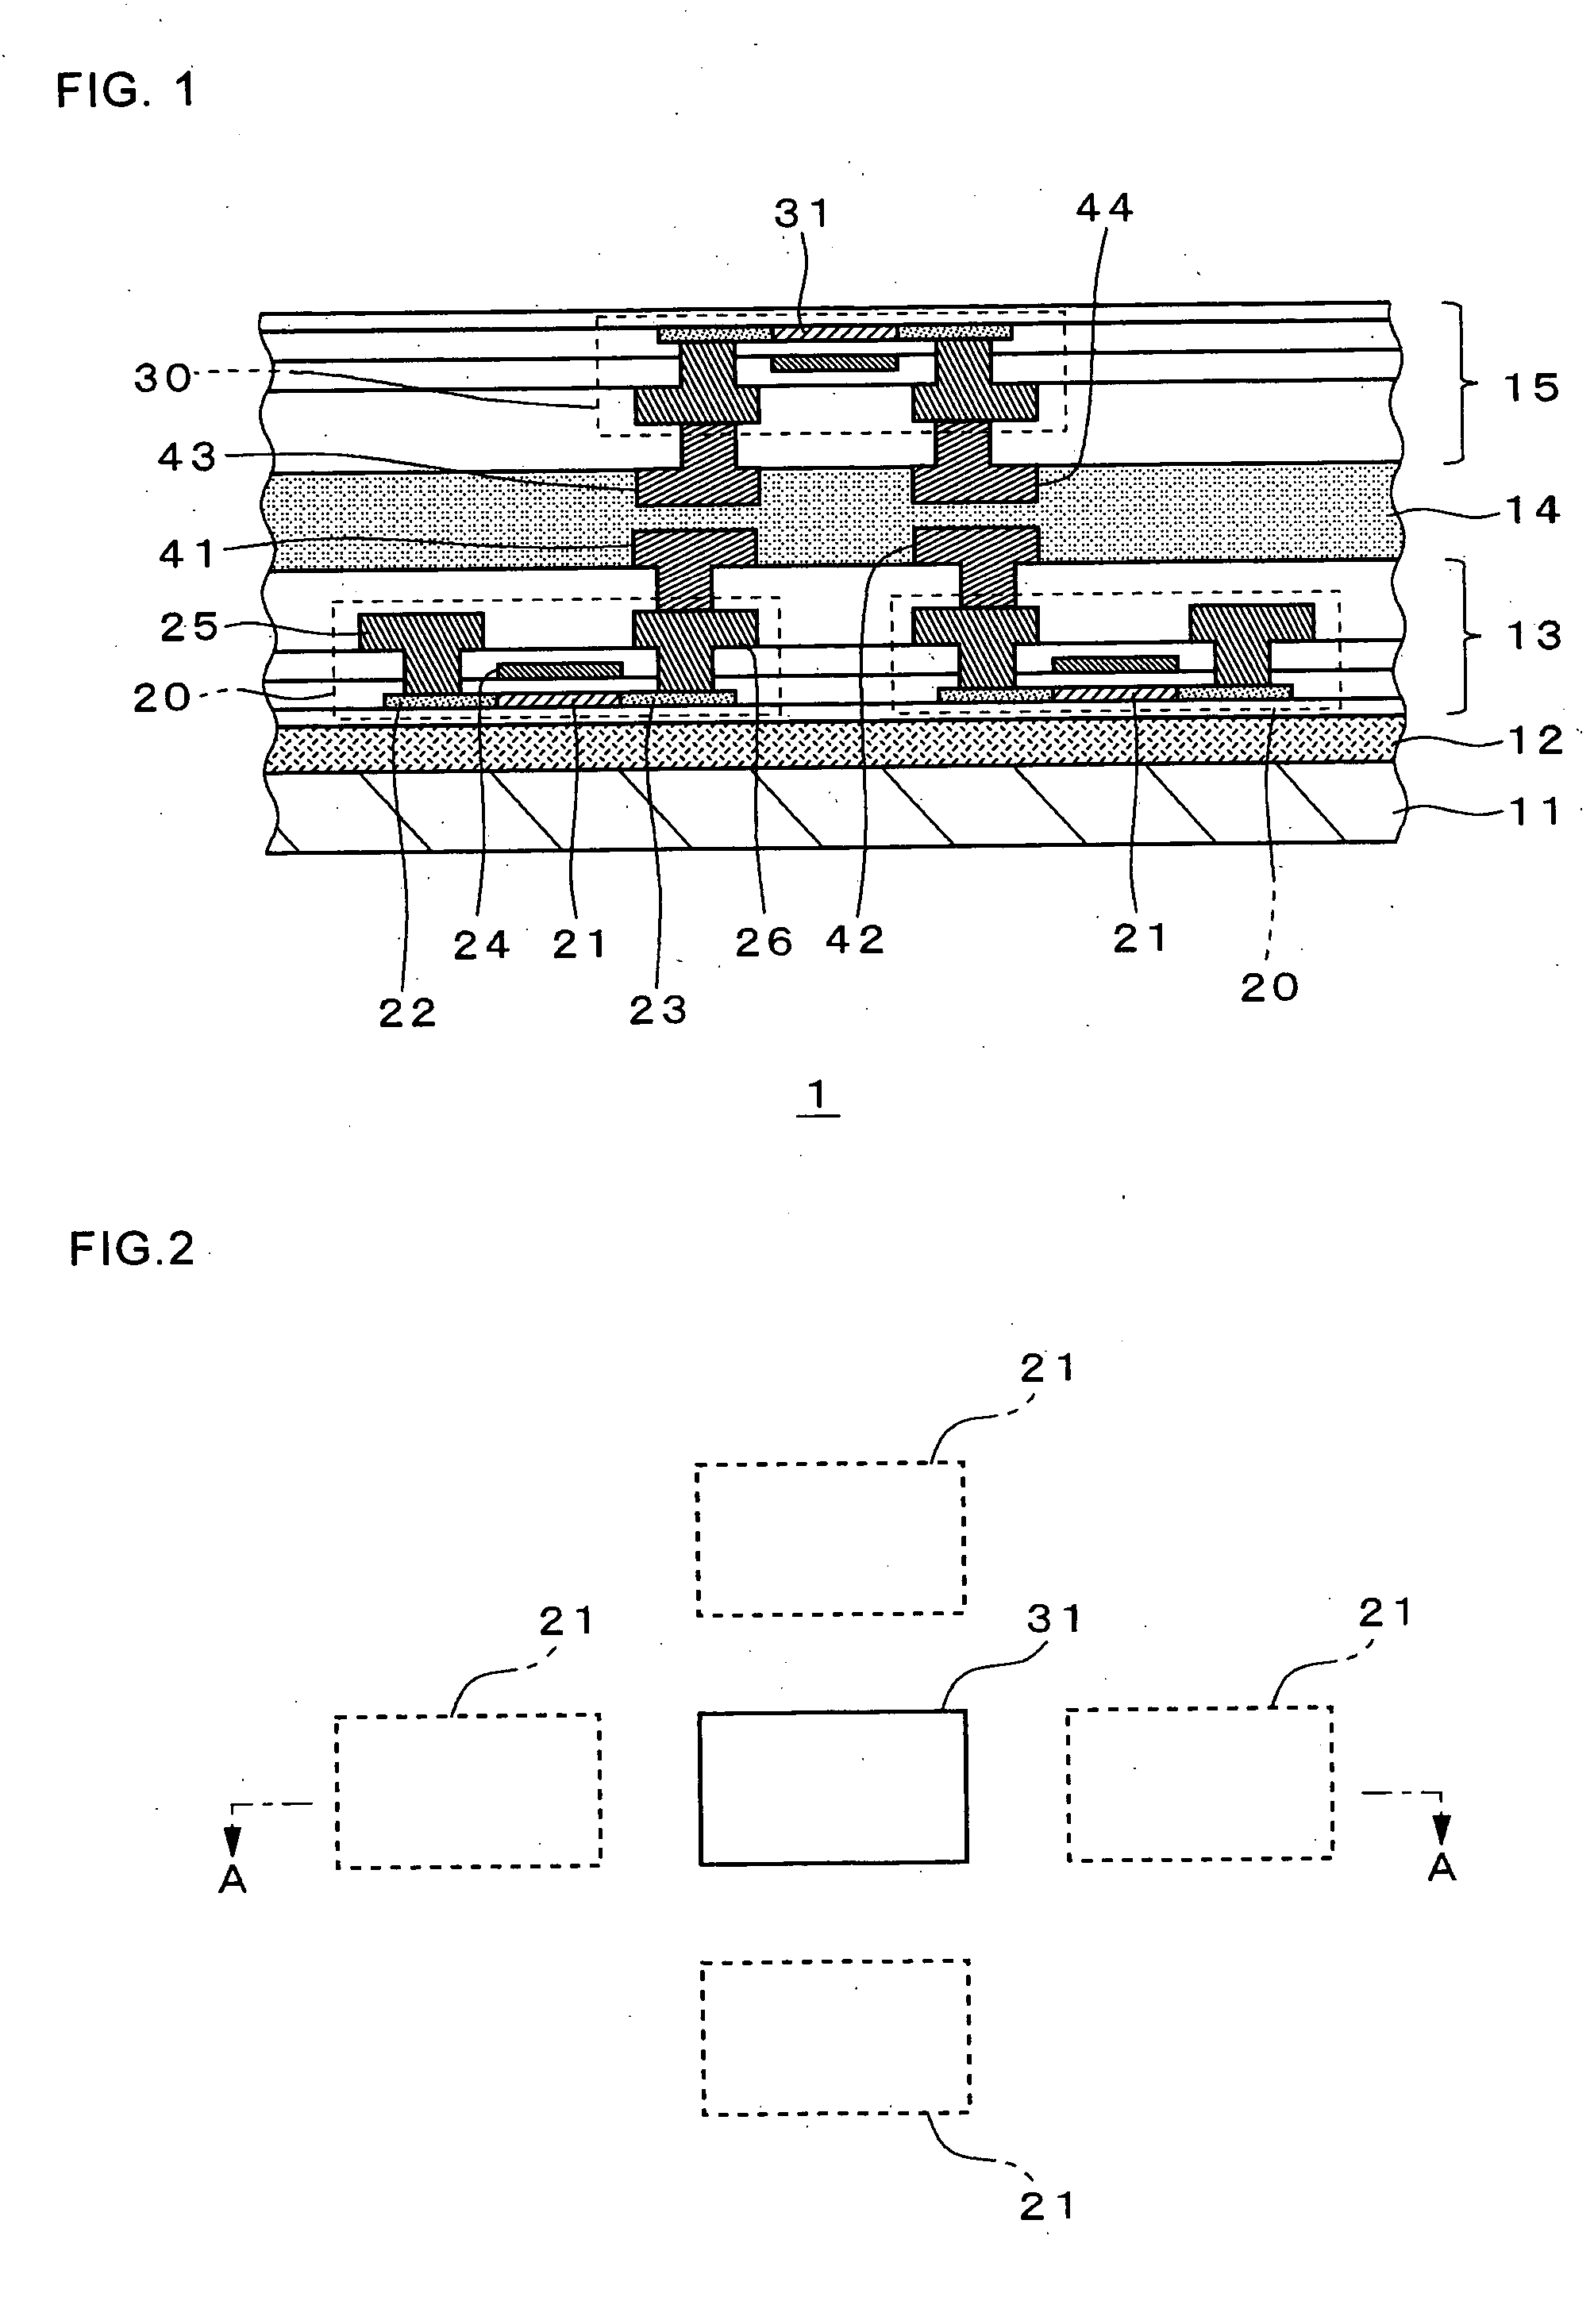 Thin film device, integrated circuit, electrooptic device, and electronic device